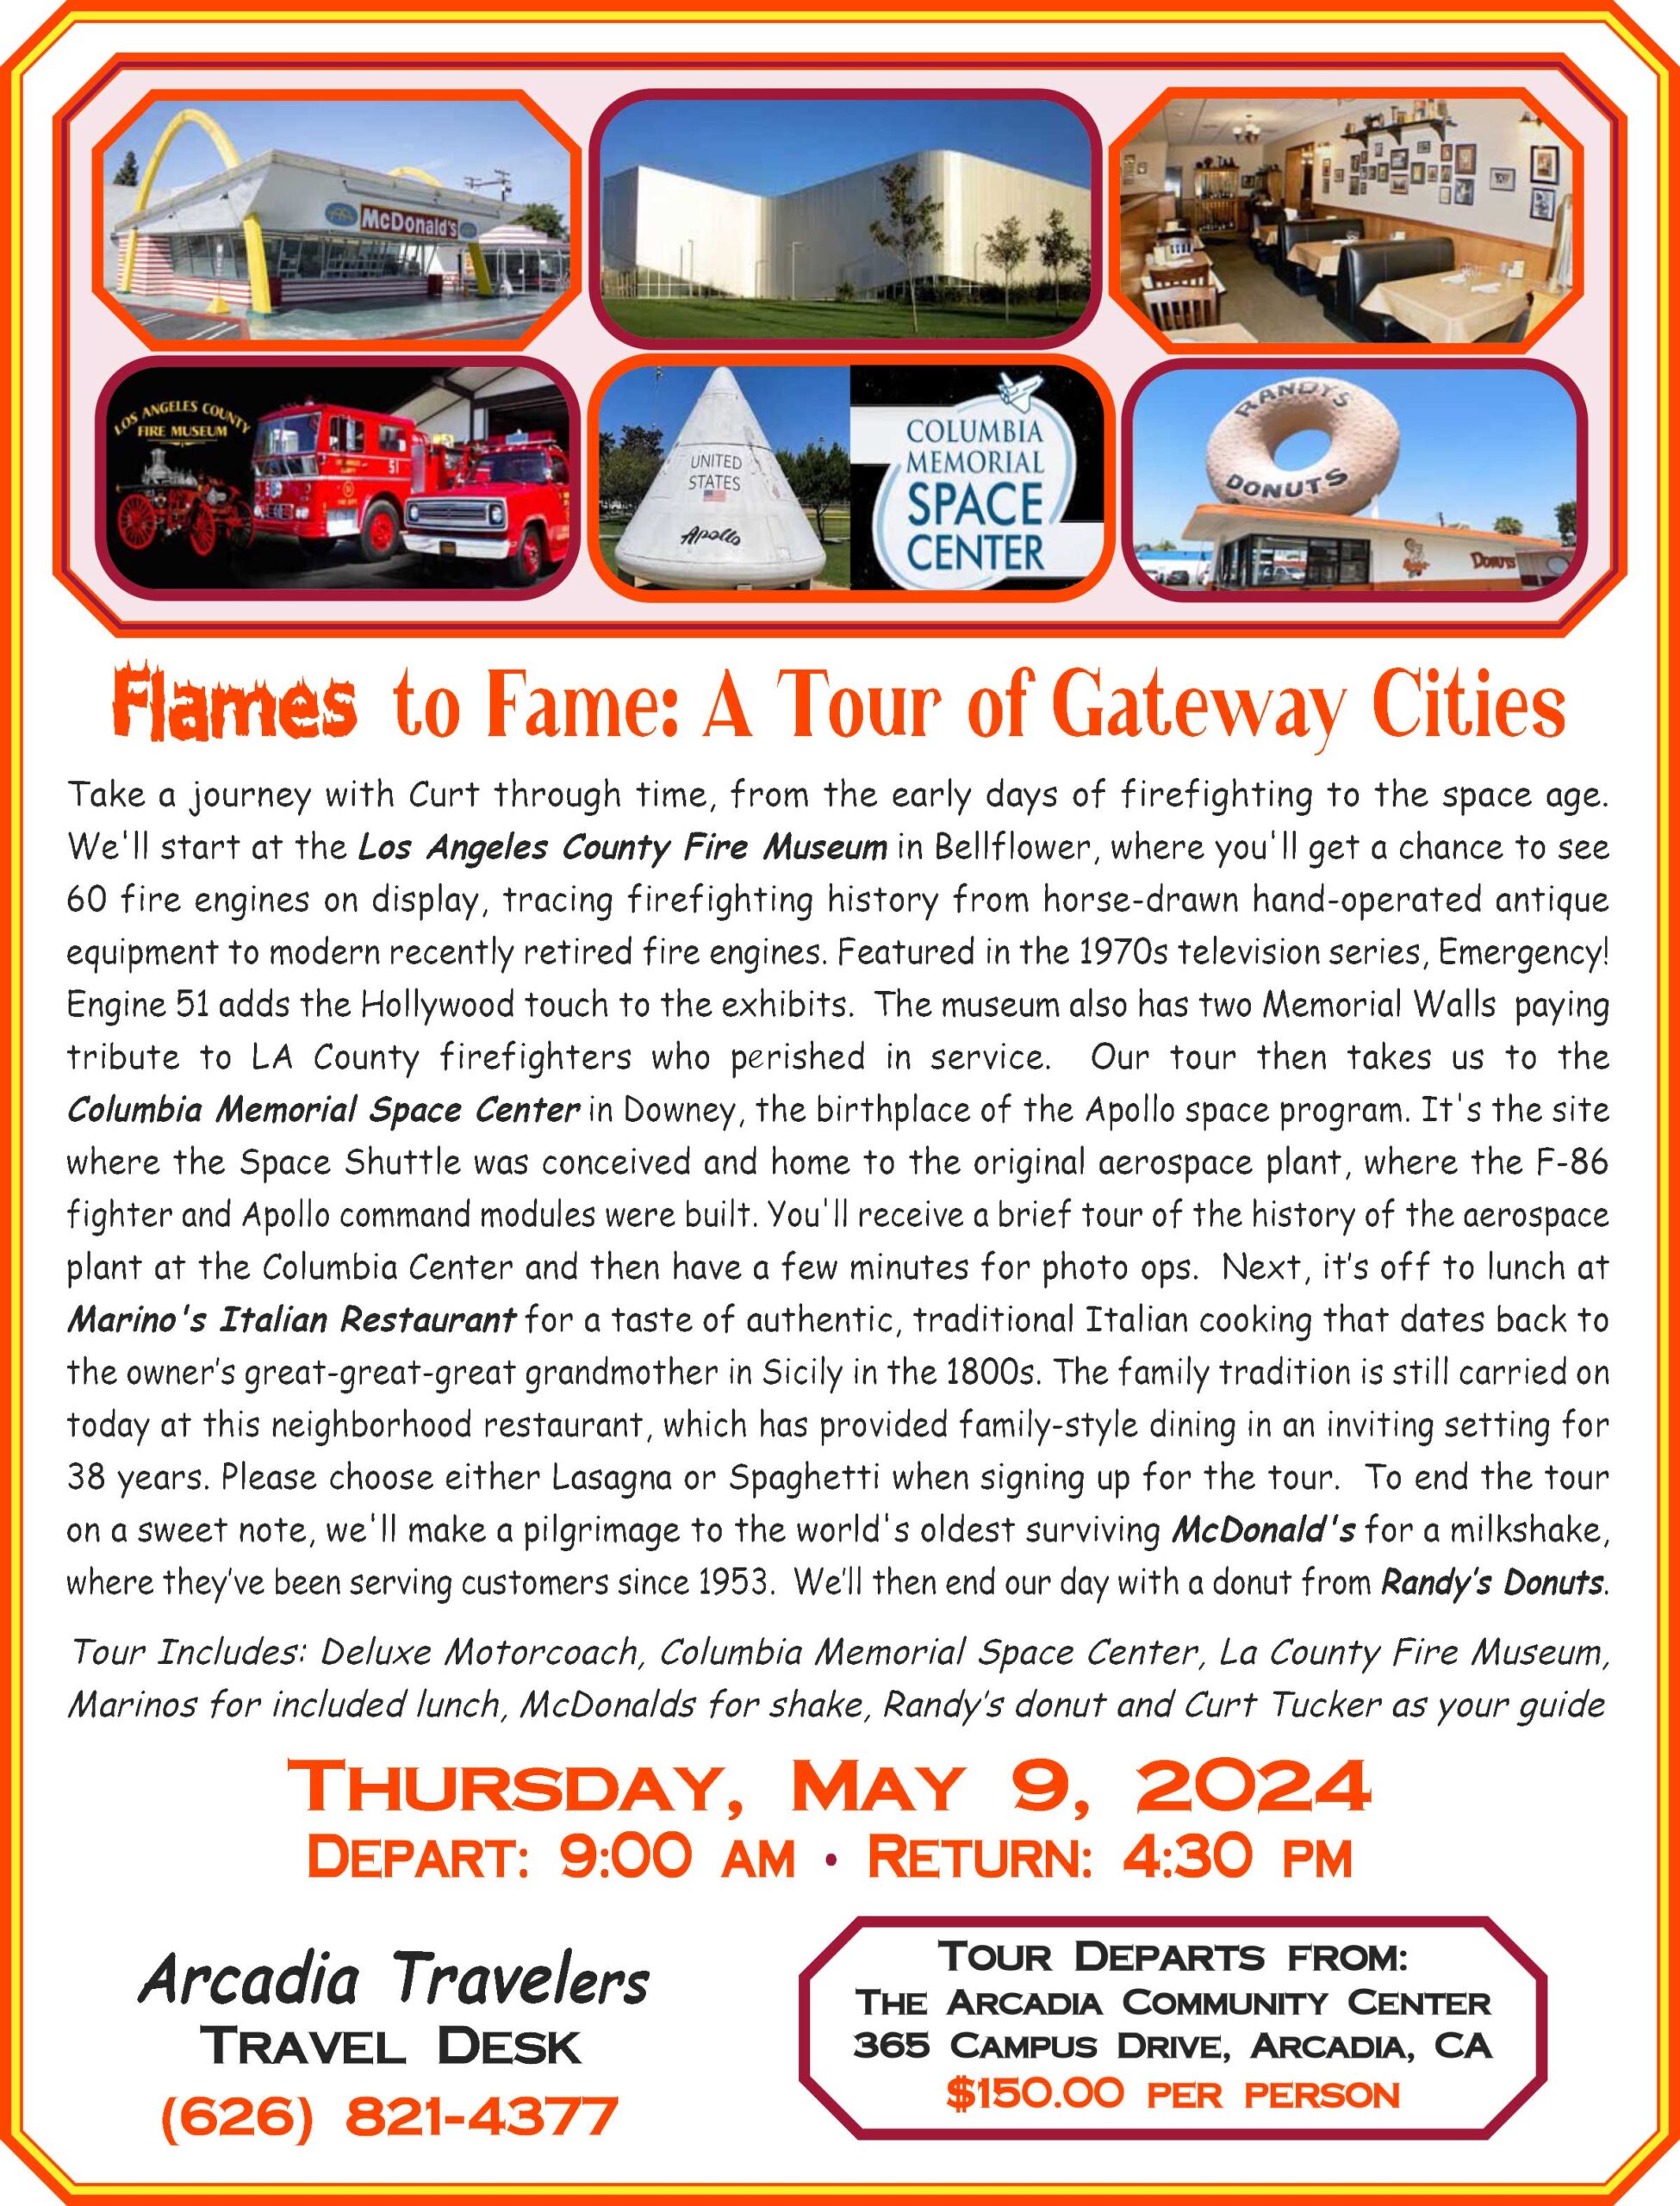 Arcadia Travelers tour featuring Gateway Cities on May 9